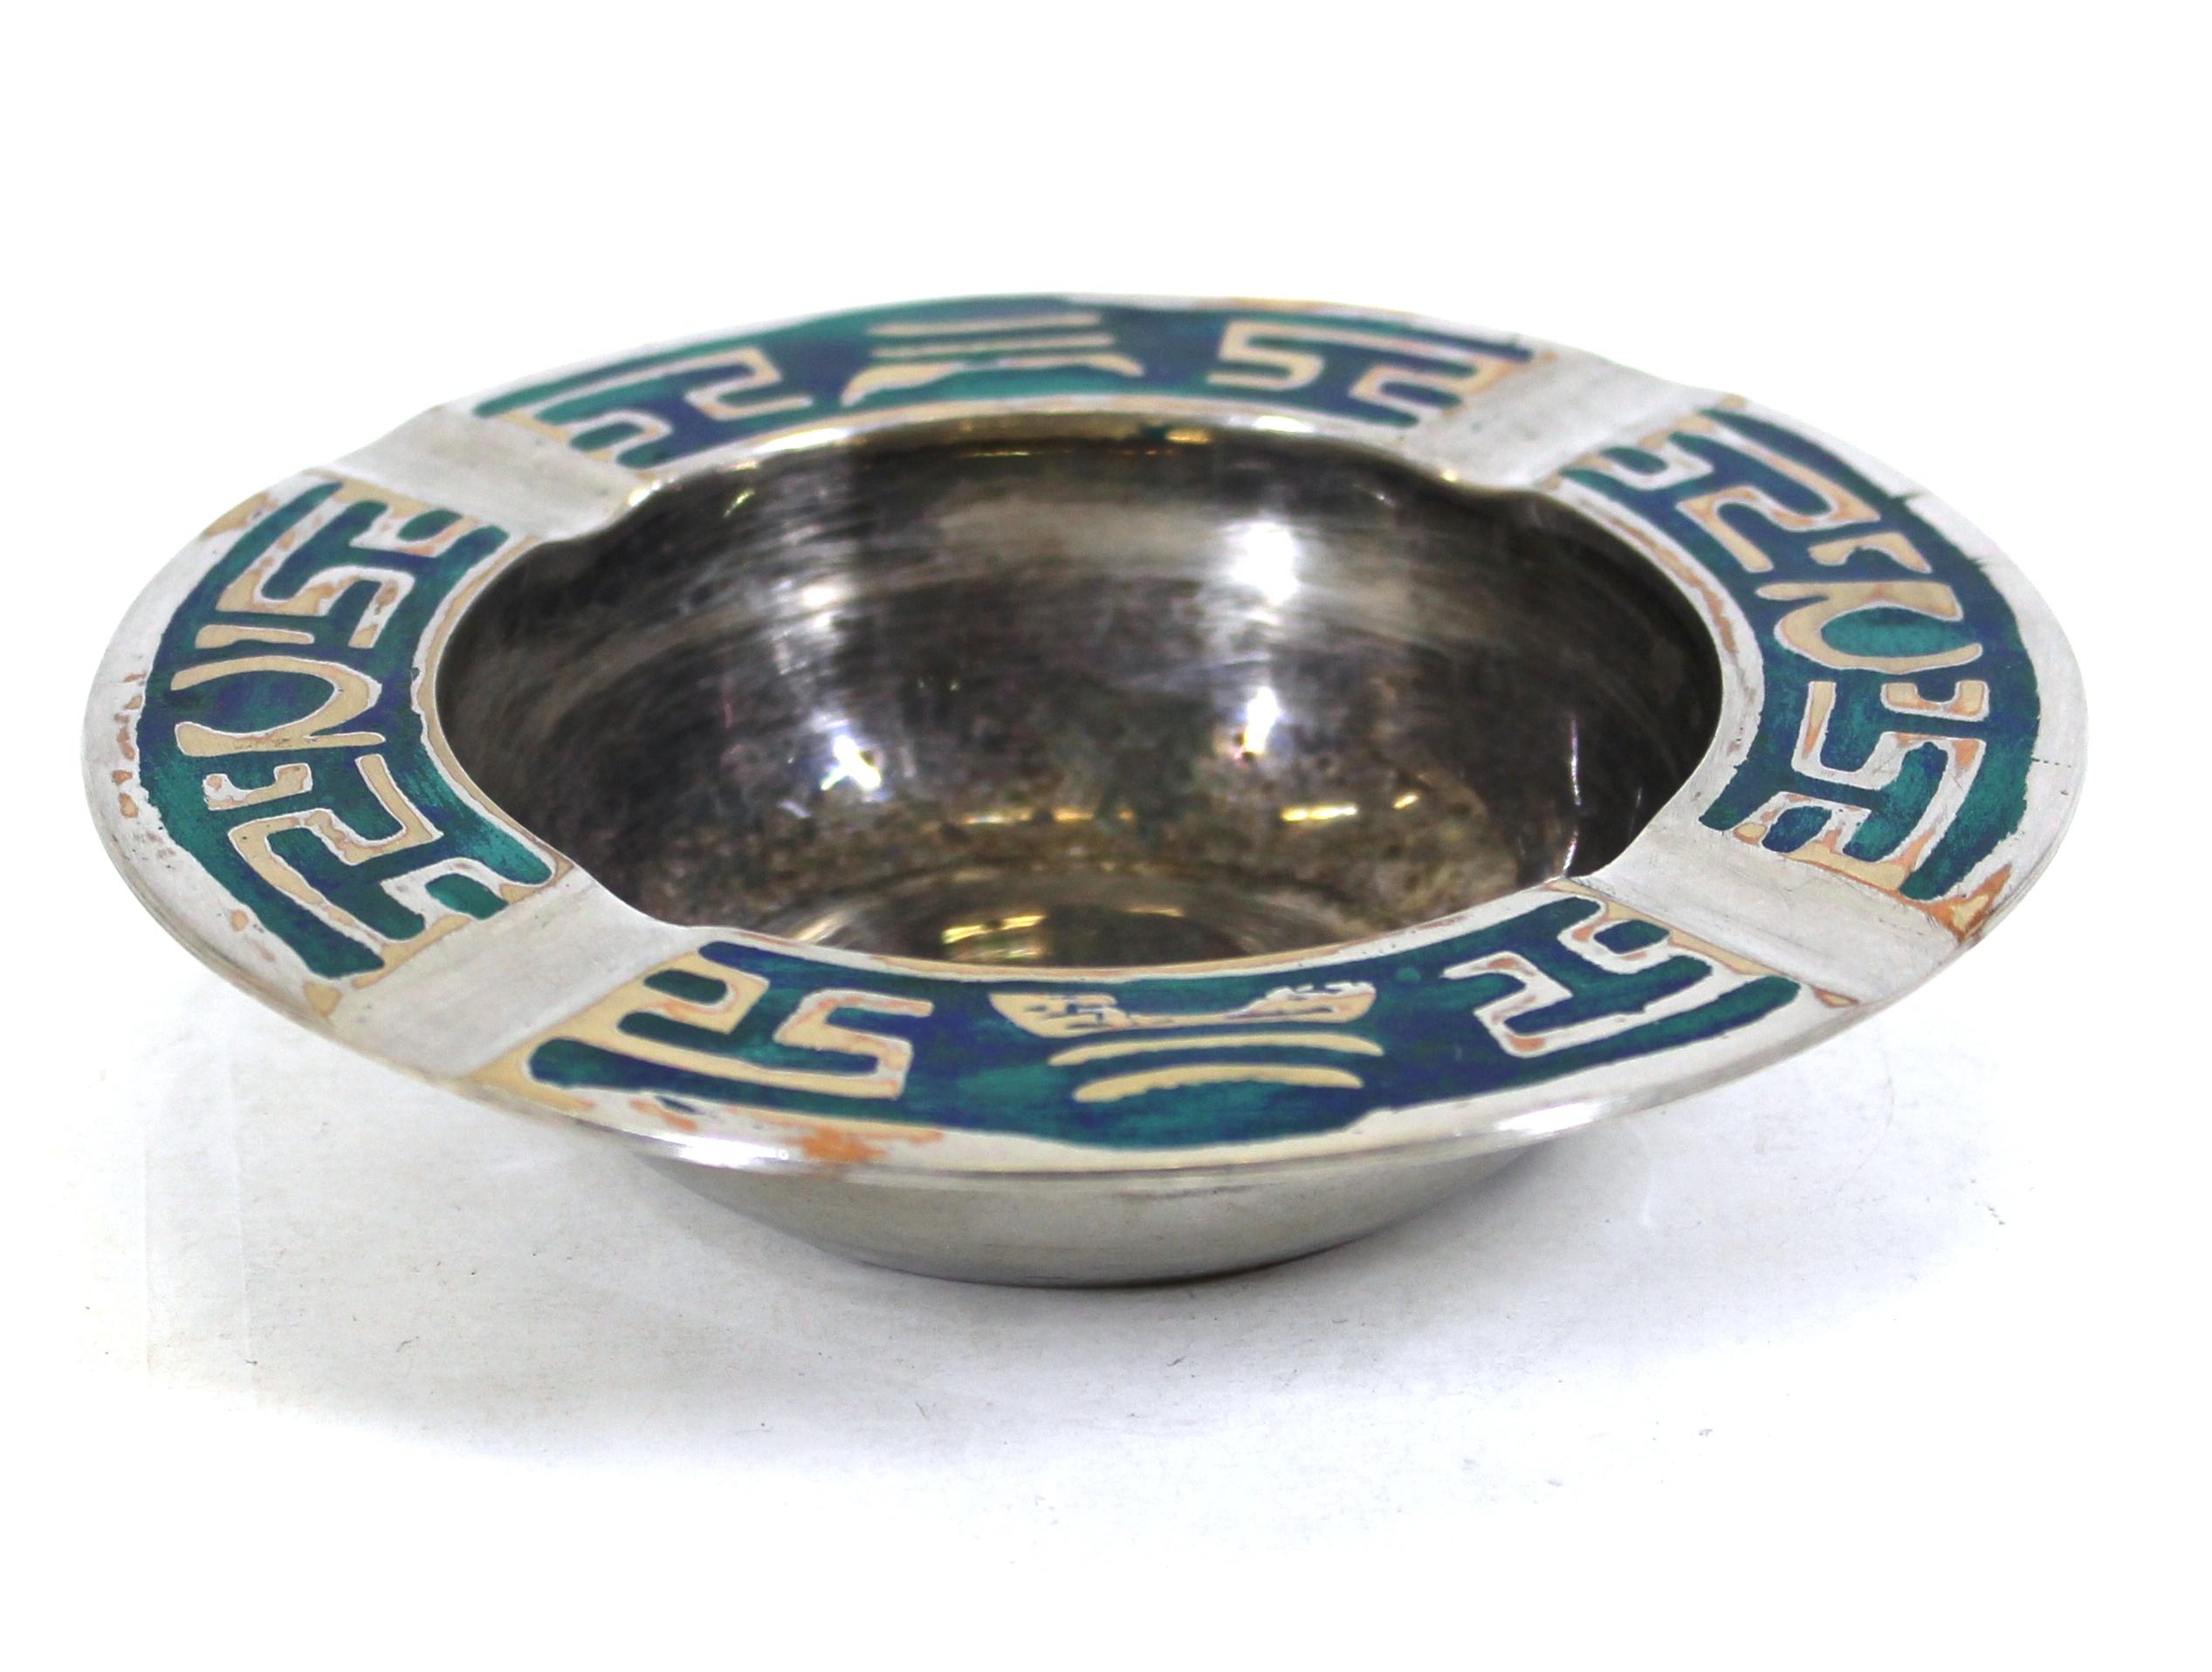 Mexican Mid-Century Modern small dish or ashtray in silver-plate with turquoise inlay elements, made by Pepe Mendoza in the 1980s. Stamped with a makers mark on the bottom. In great vintage condition with age-appropriate wear.